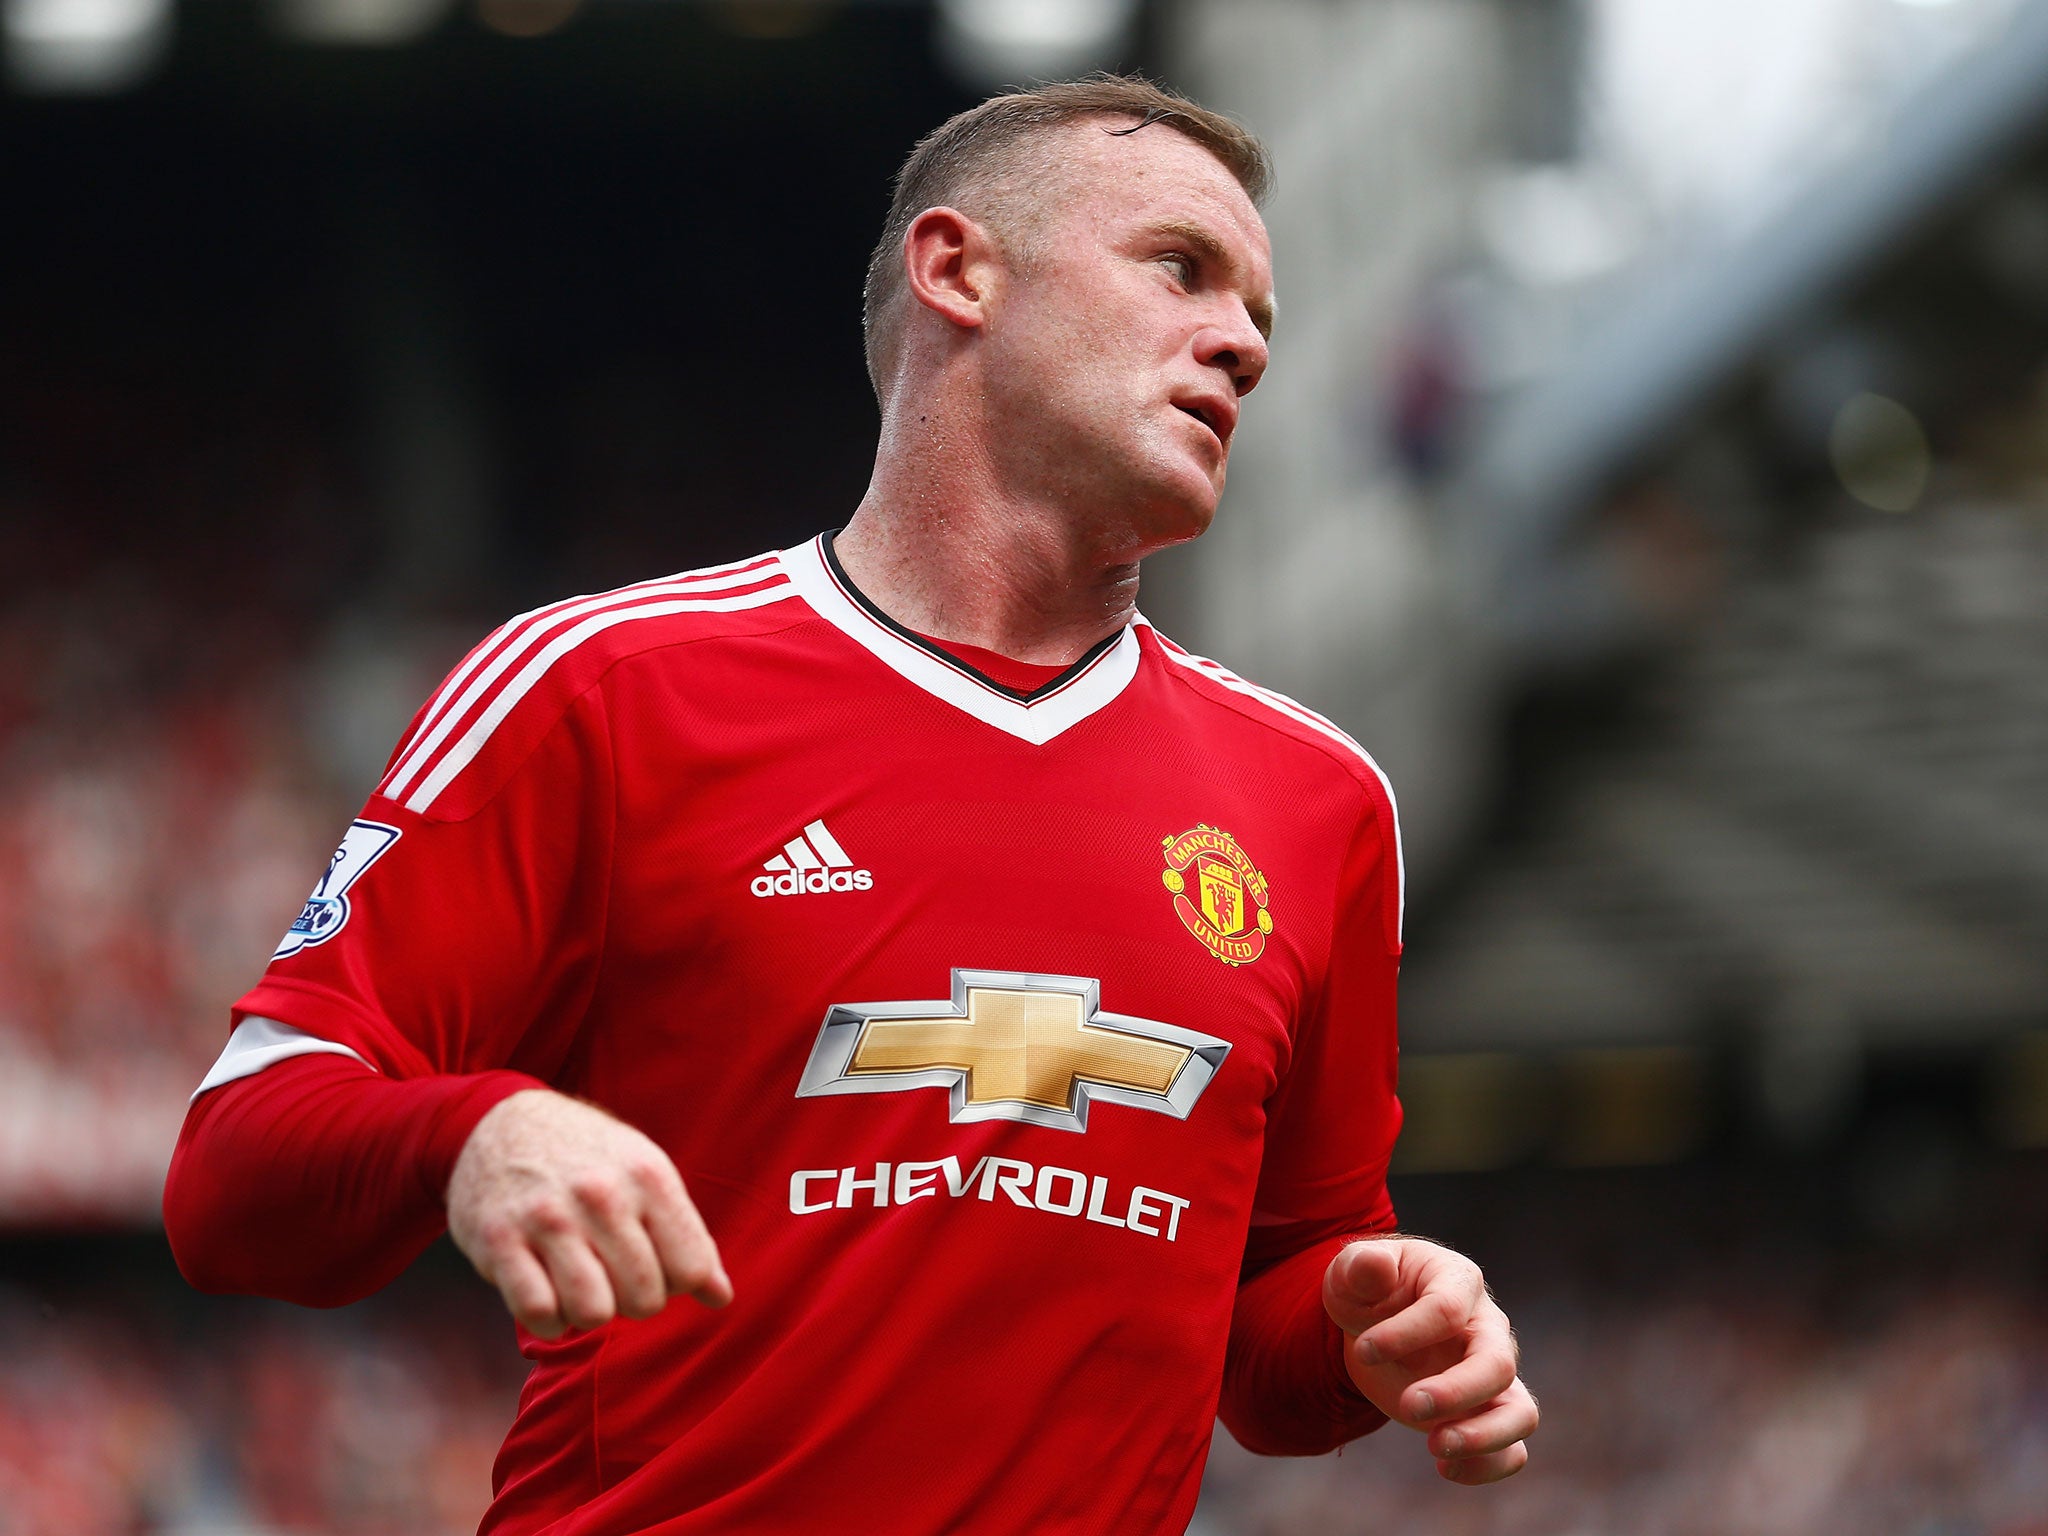 Manchester United striker Wayne Rooney reacts after a missed chance